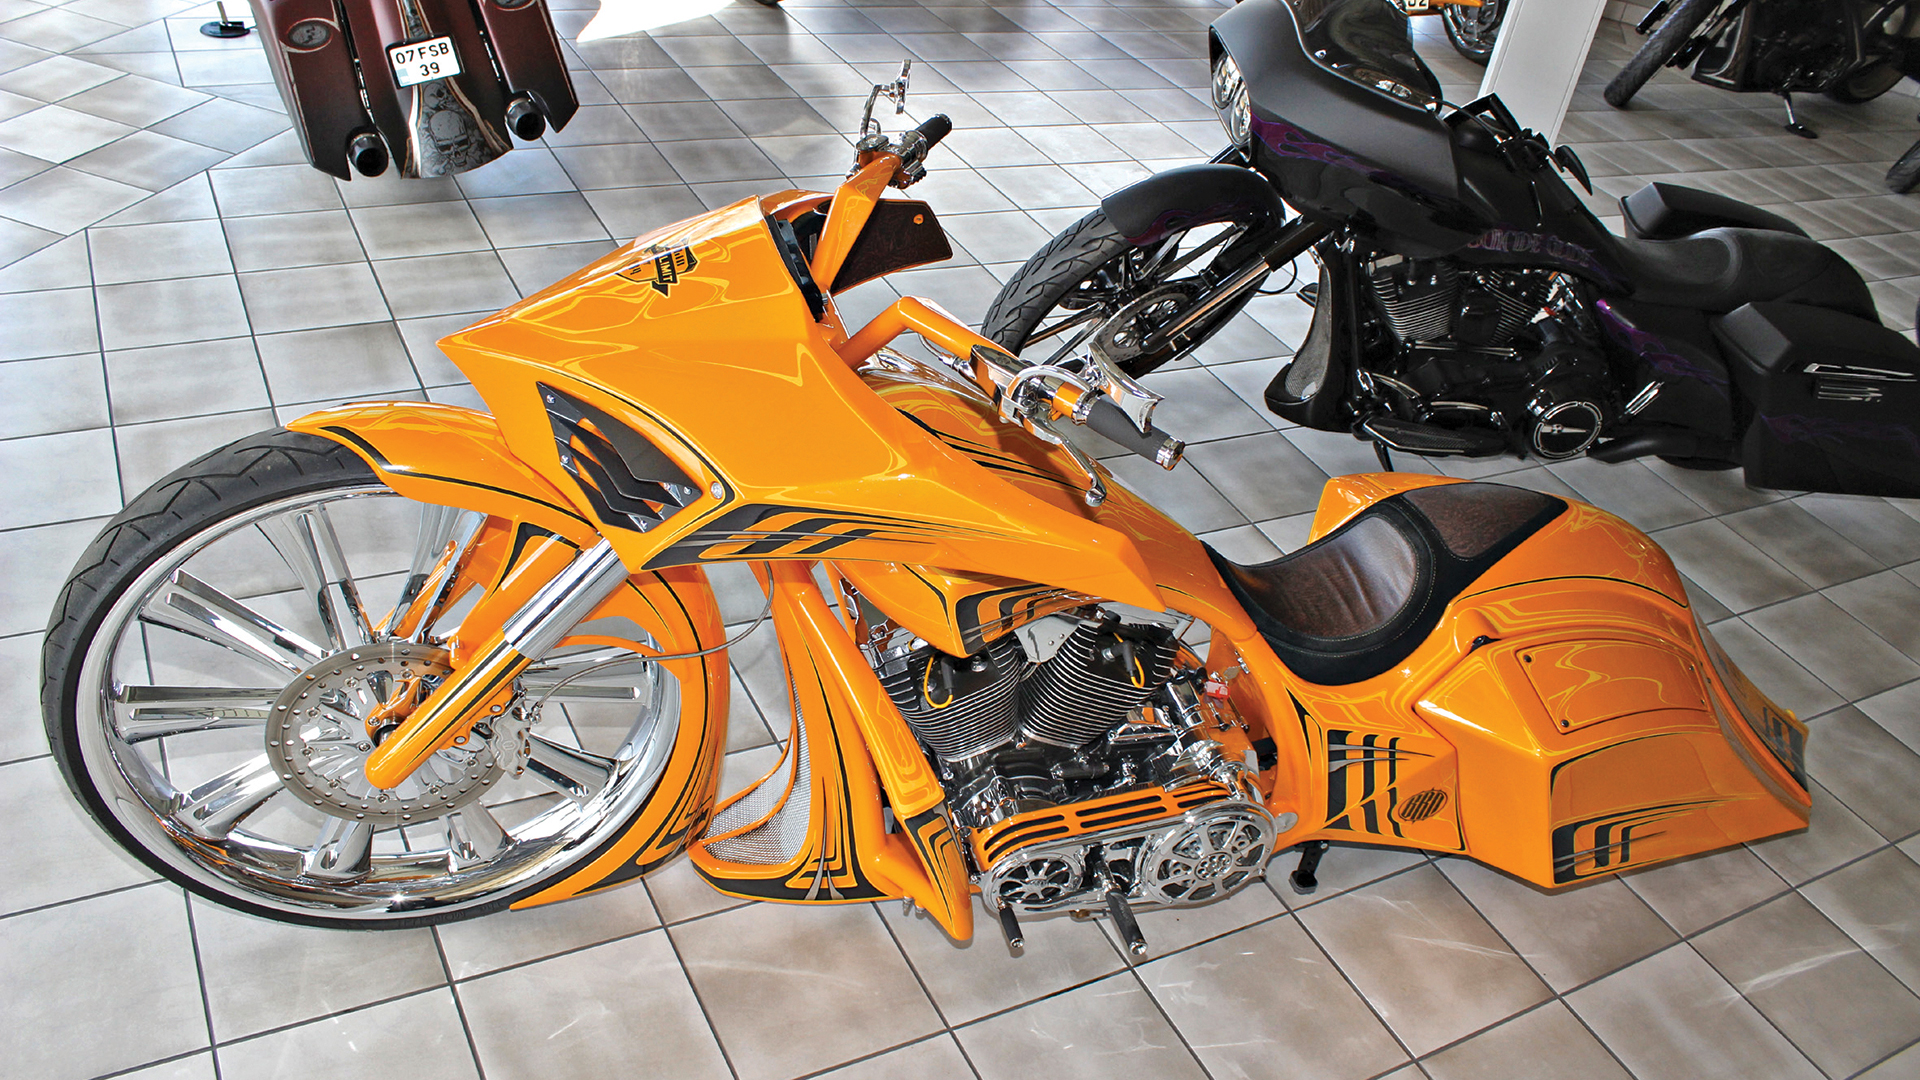 Kodlin Motorcycle customizes motorcycles based upon bikes from the American brand Harley-Davidson. 